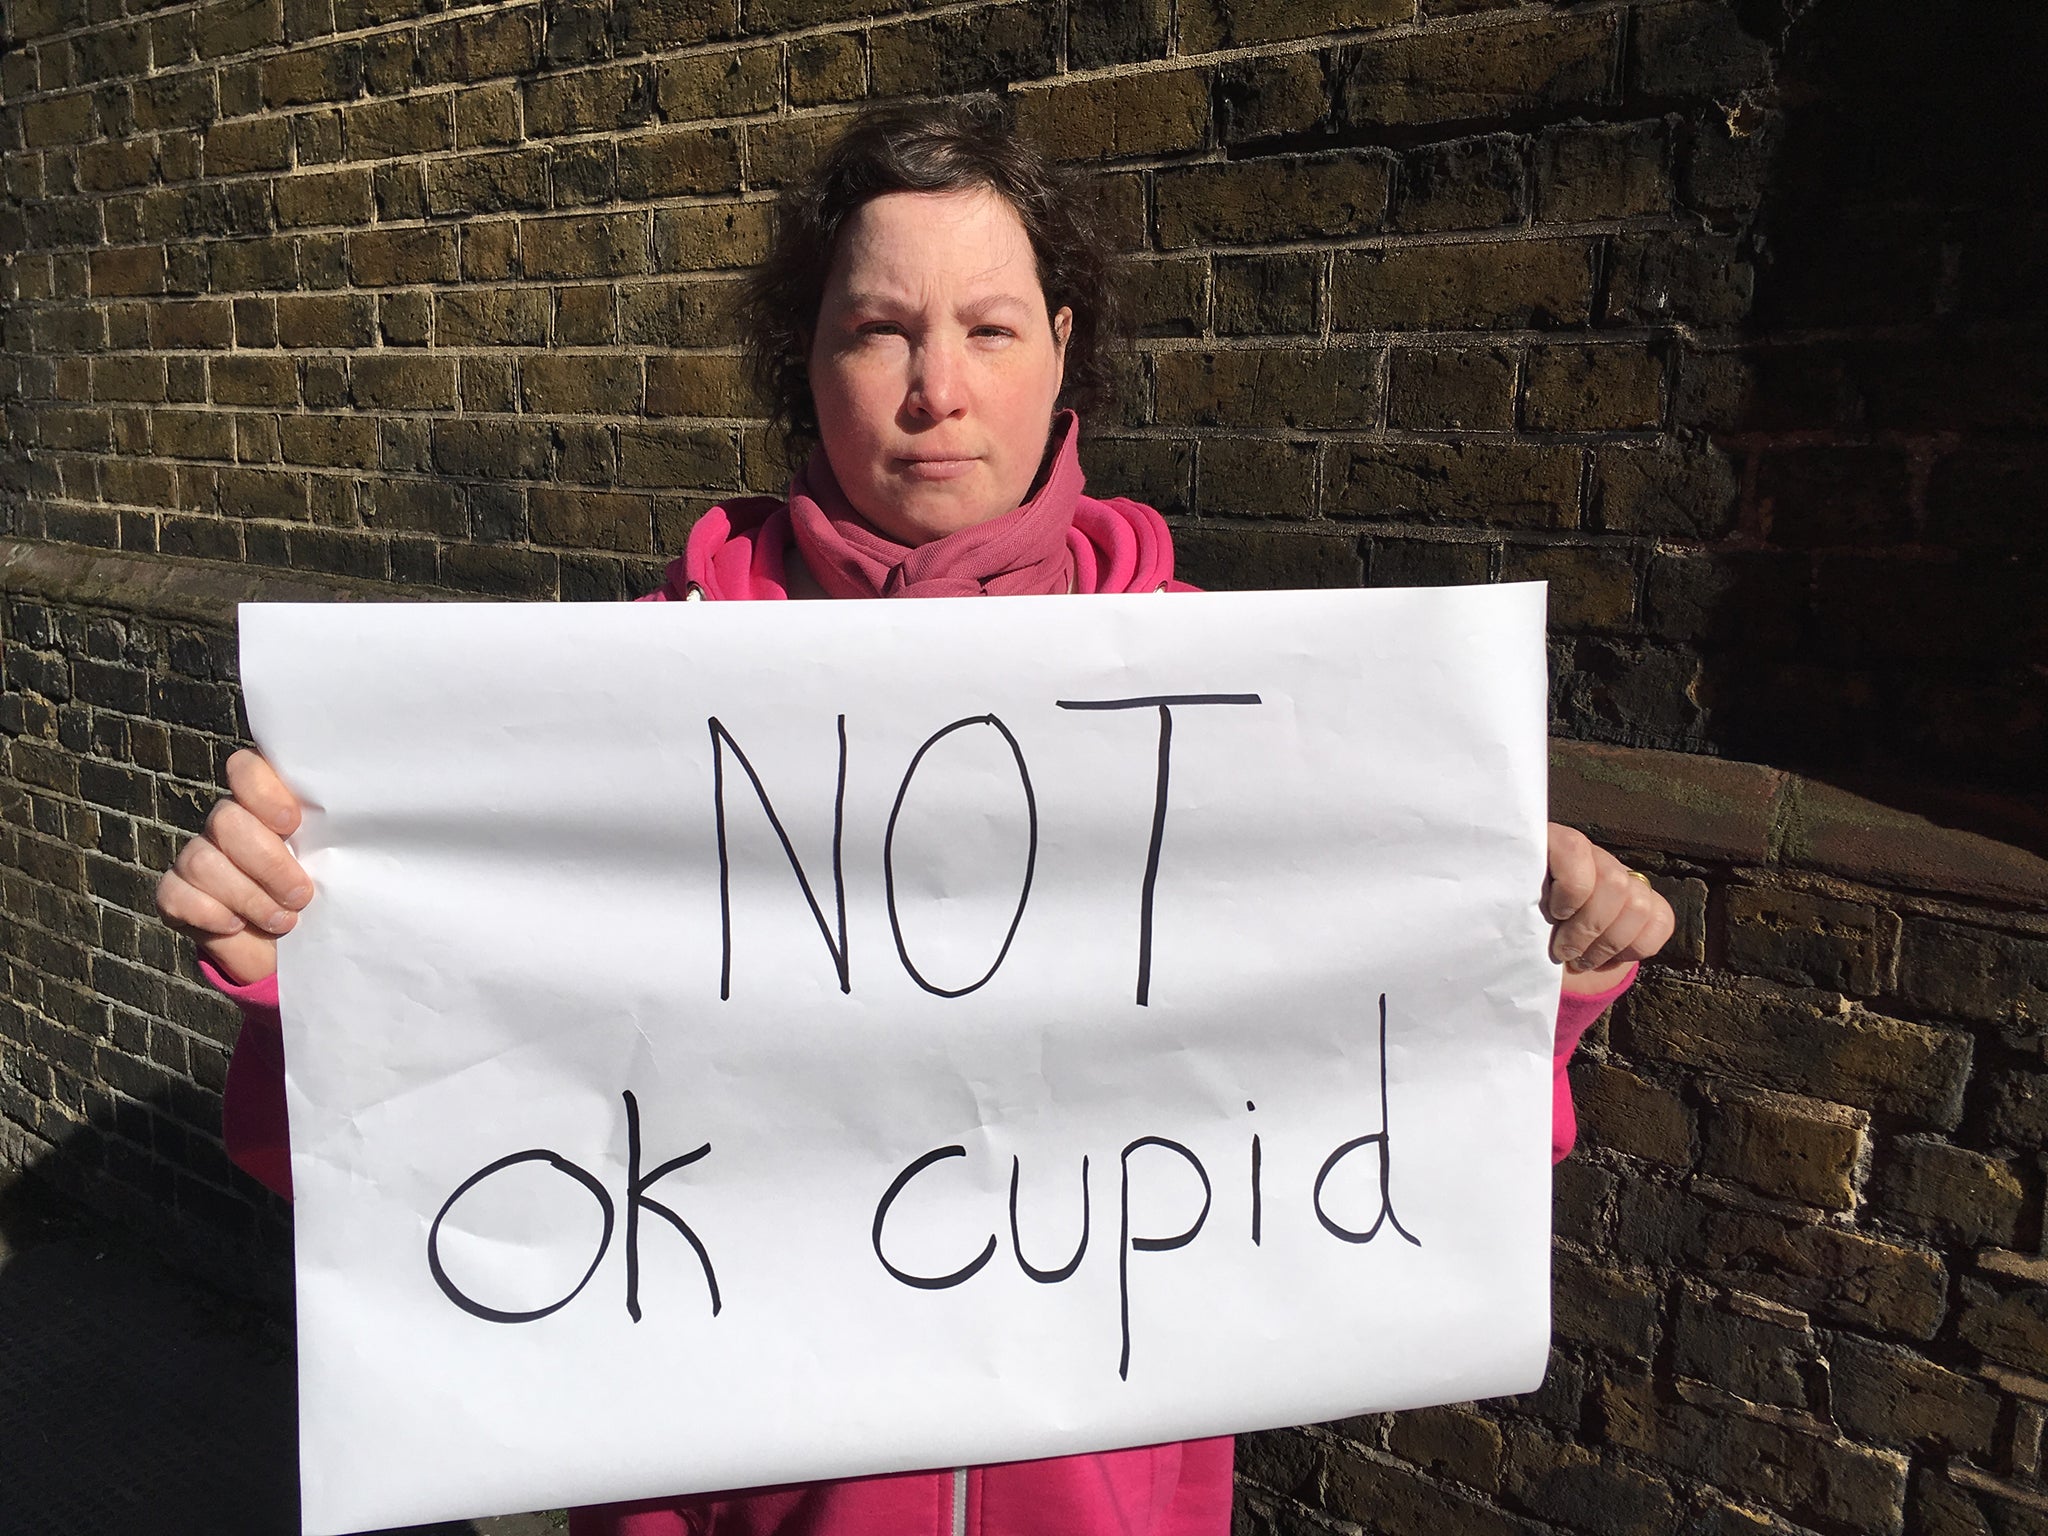 Mencap campaigner Ciara Lawrence has started a petition demanding an apology from OkCupid